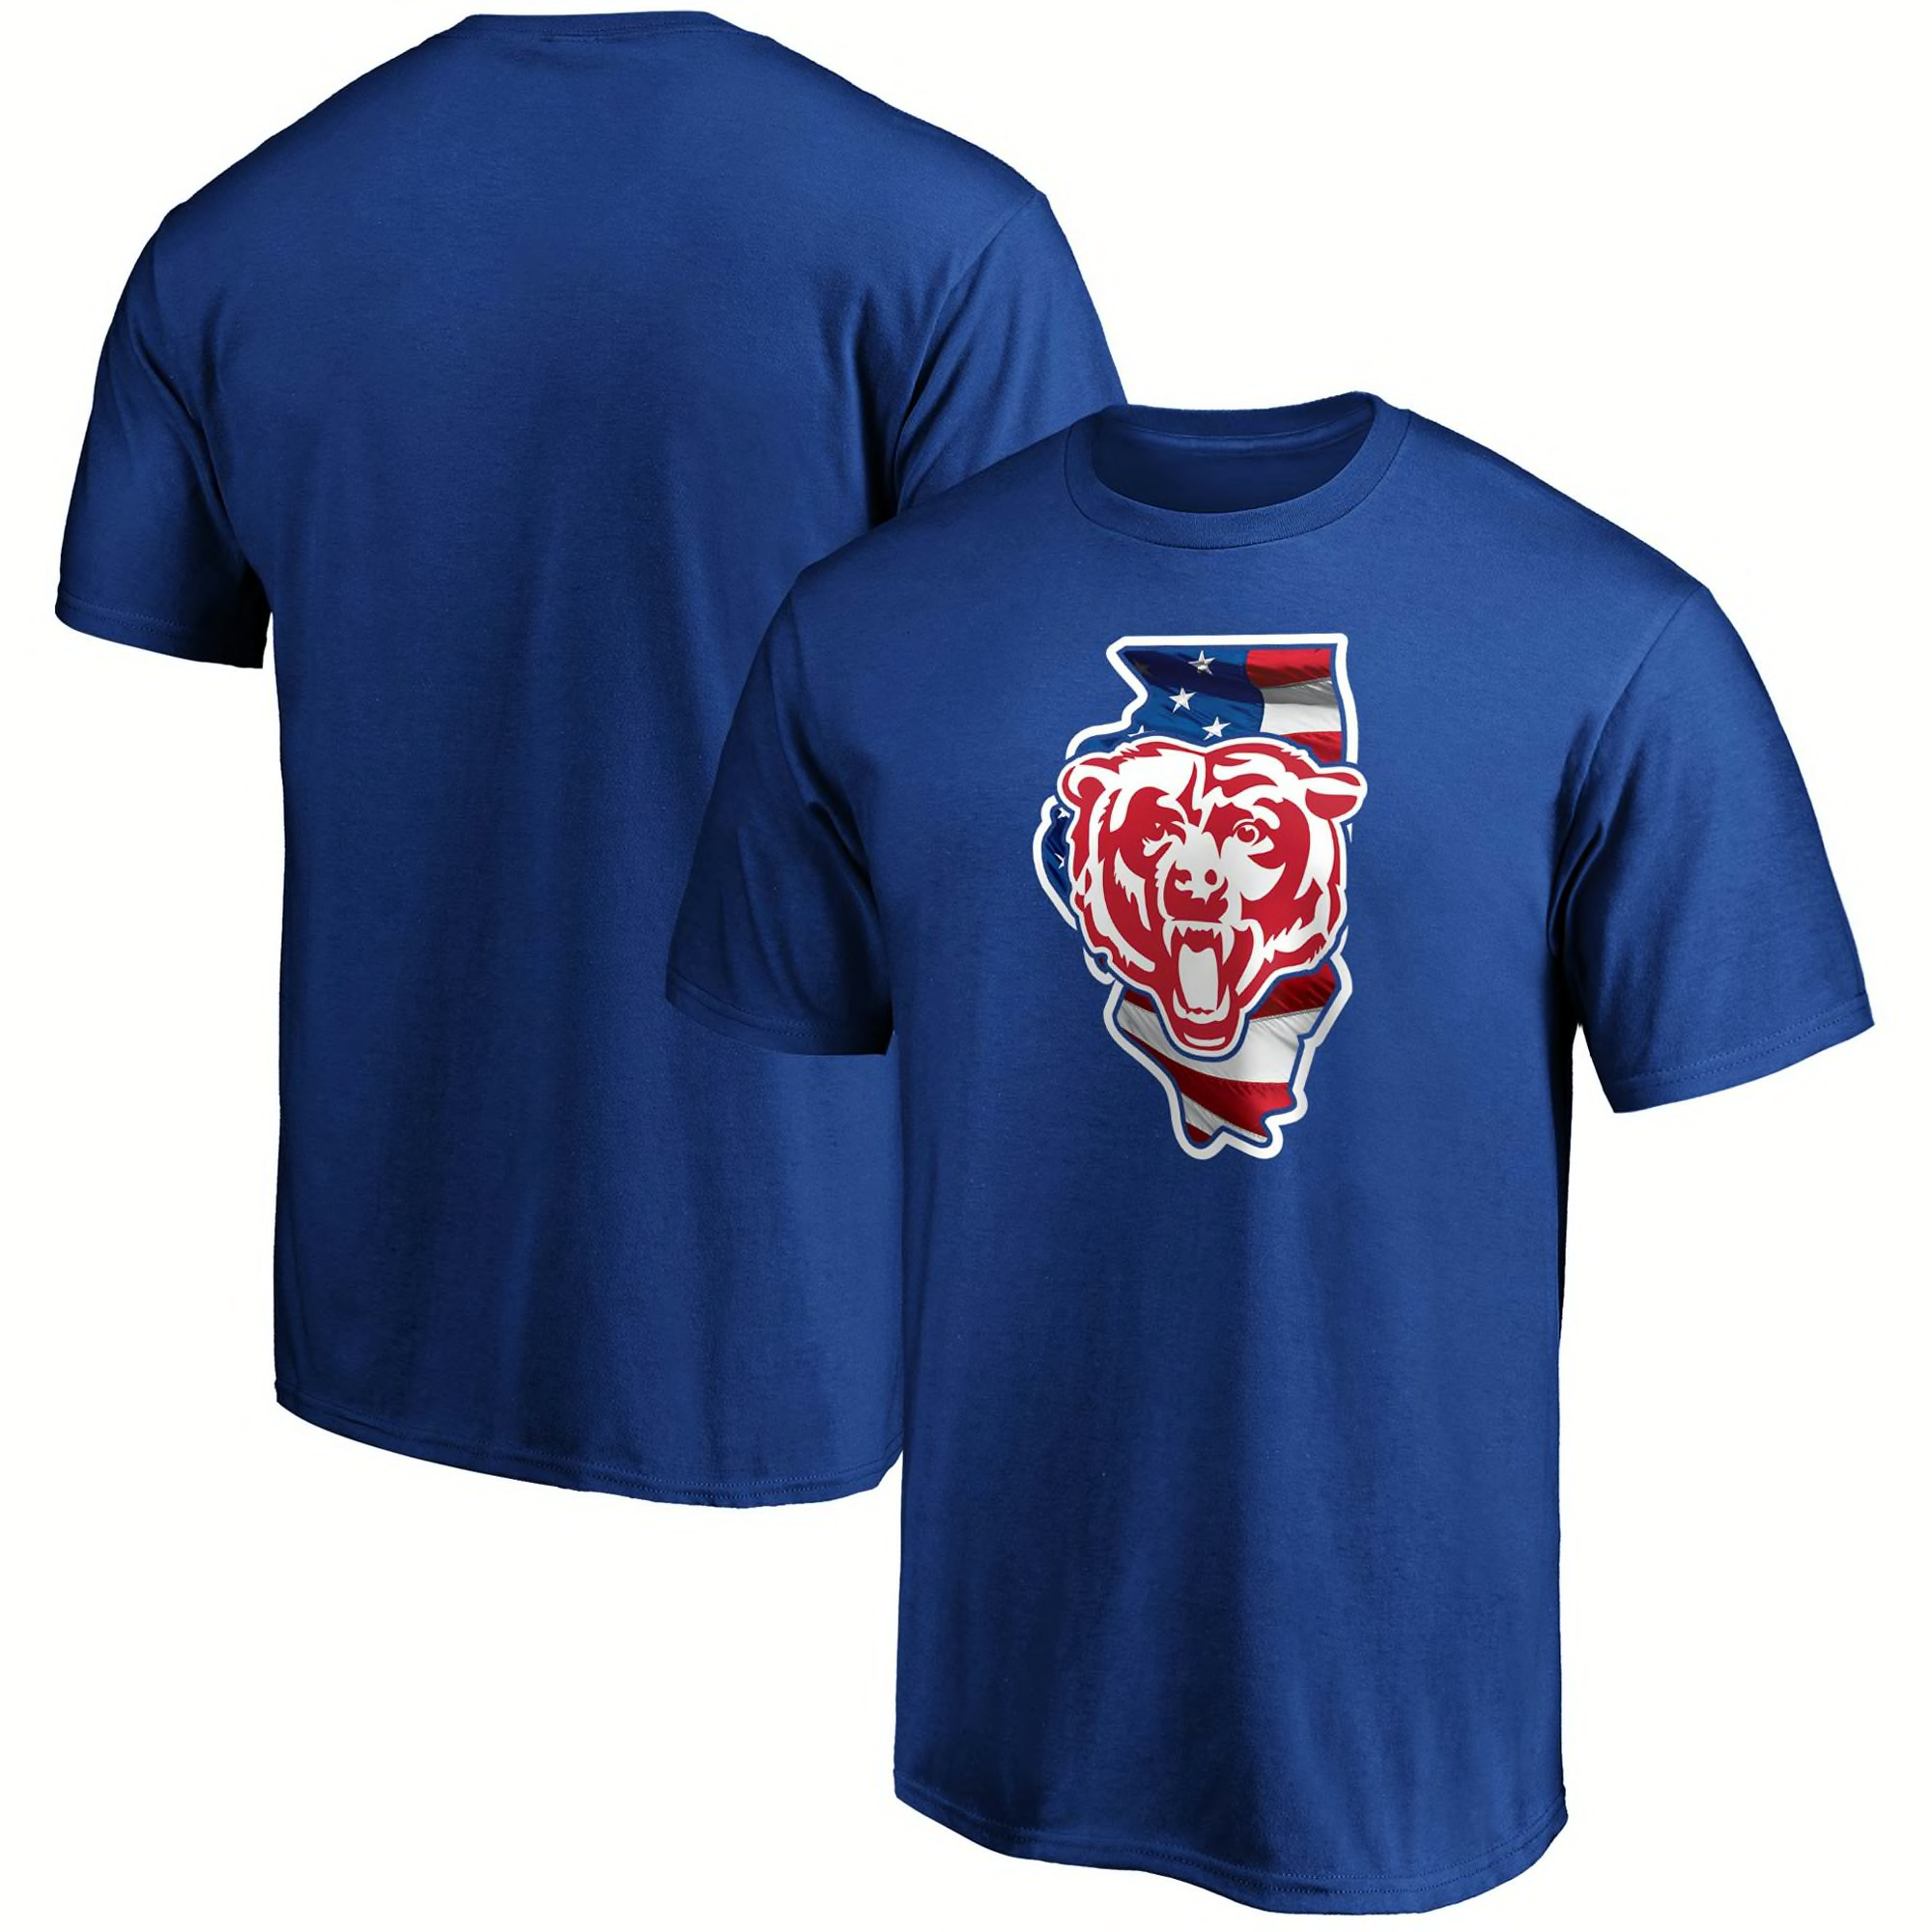 Father's Day gifts for the Chicago Bears fan